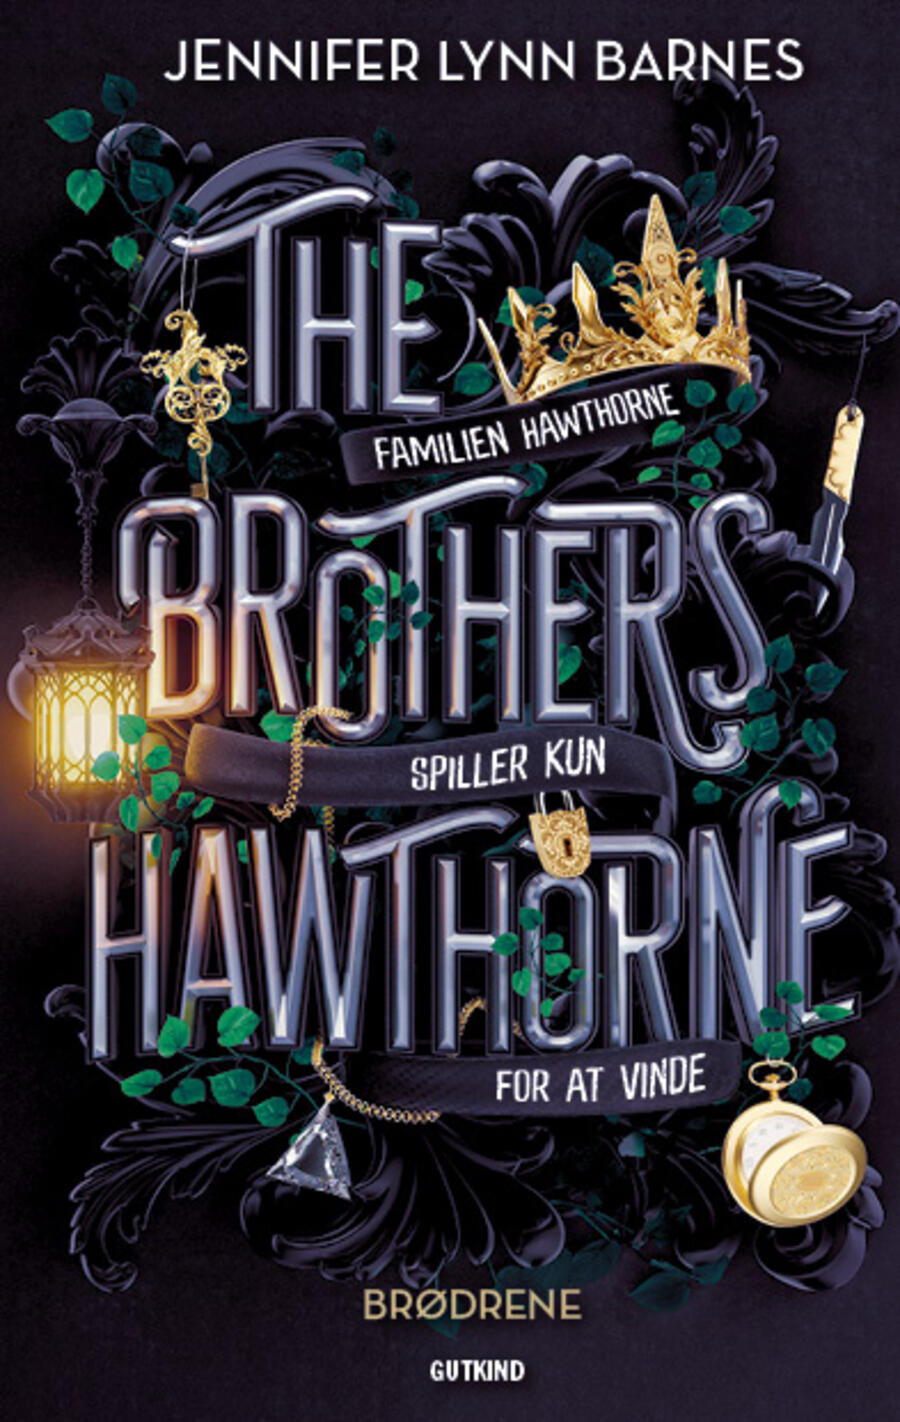 THE BROTHERS HAWTHORNE